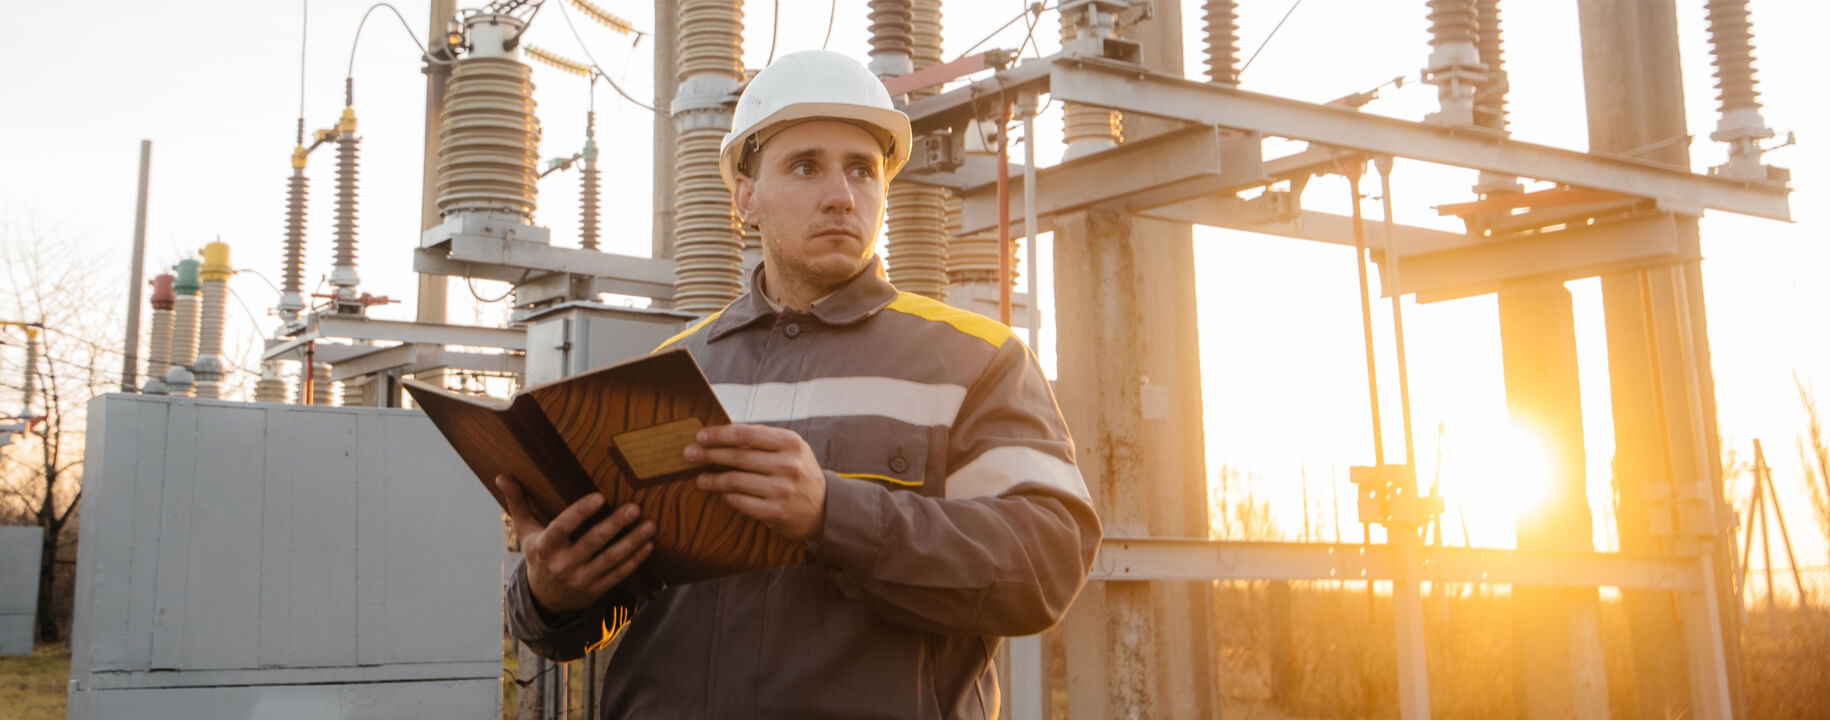 Man-standing-in-front-of-transformer-substation